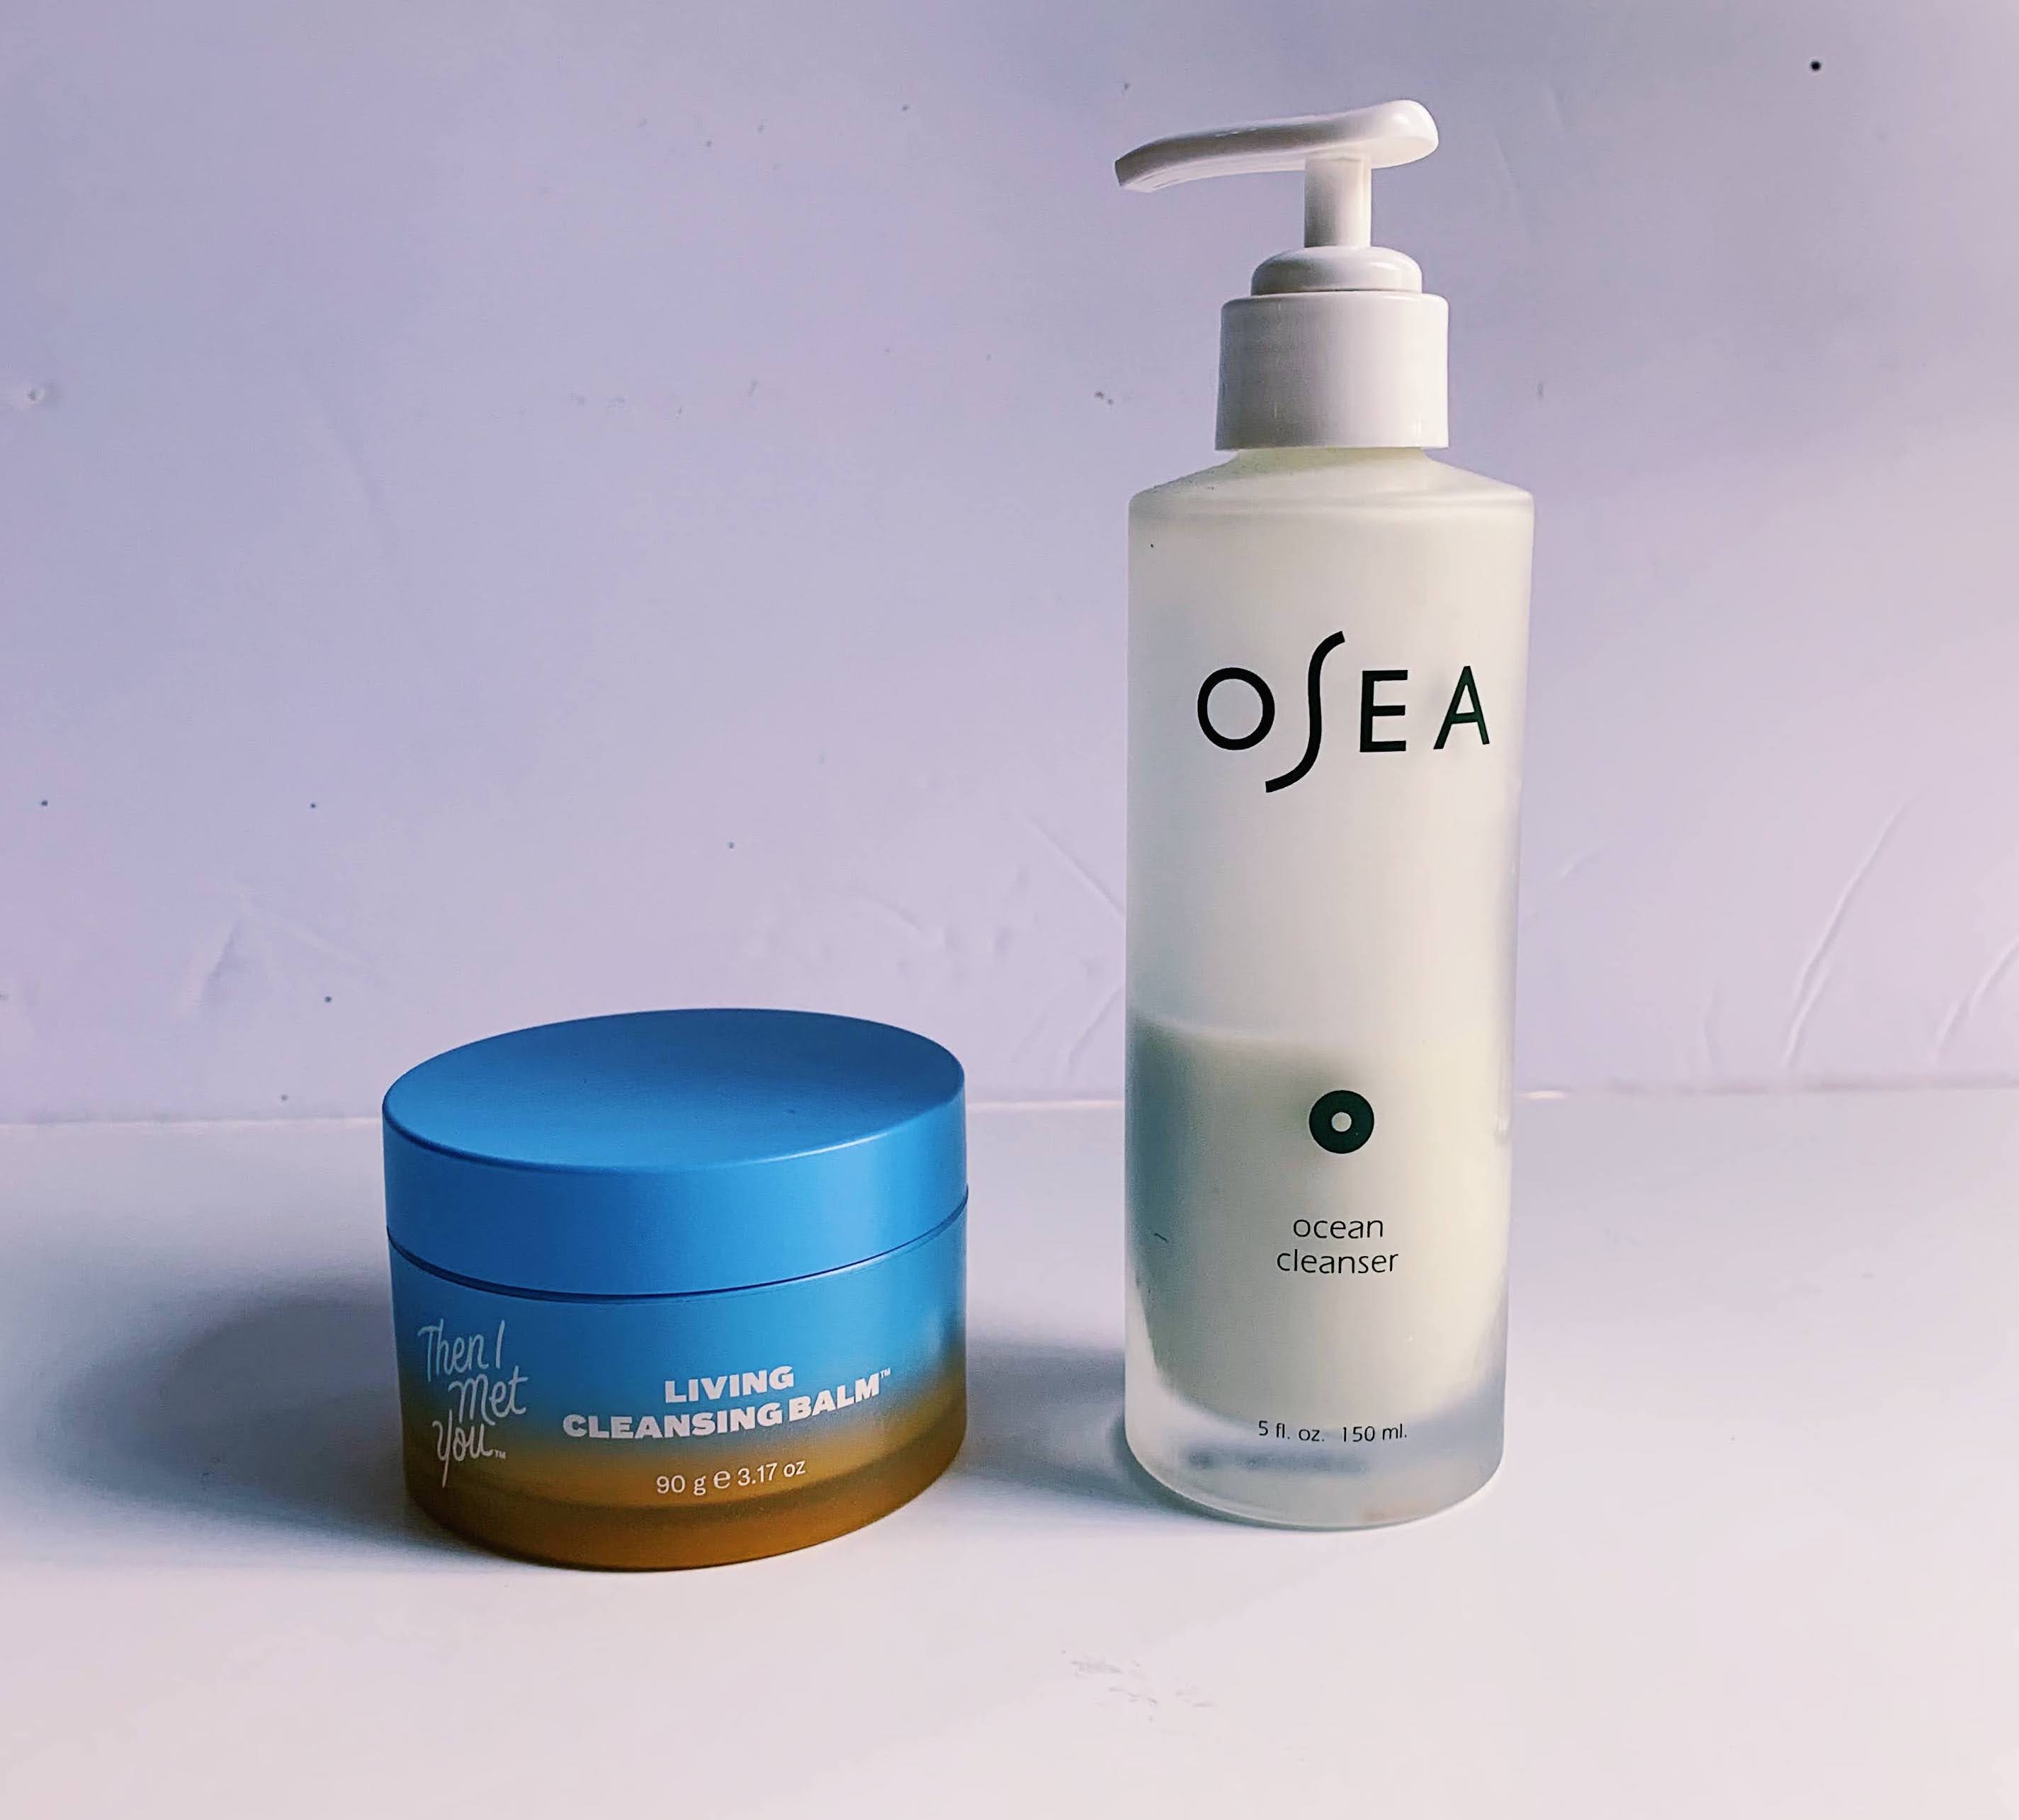 Then I Met You Living Cleansing Balm and Osea Ocean Cleanser